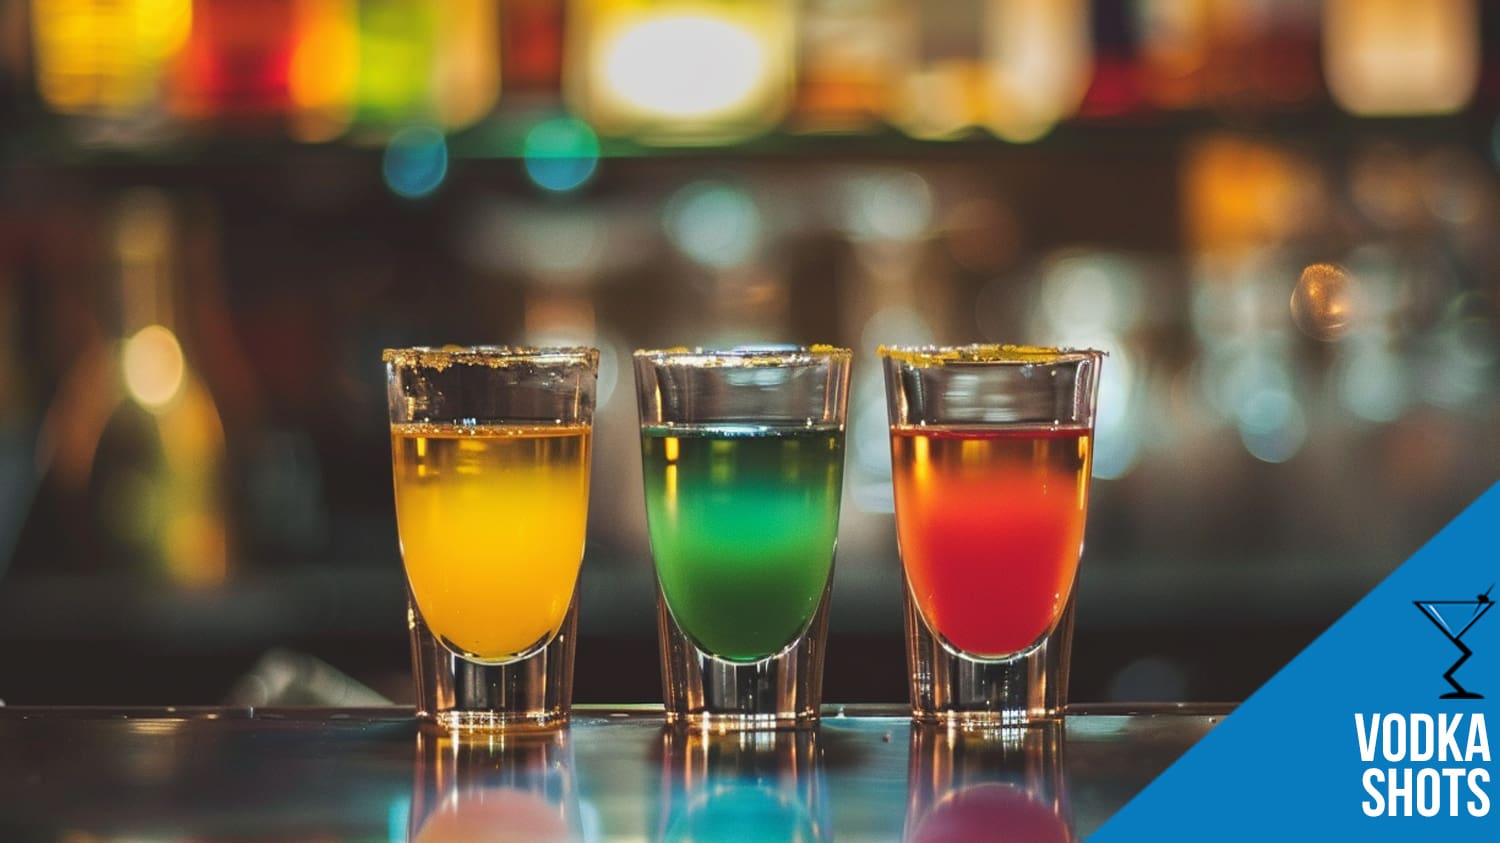 Vodka Shots: Exciting Recipes for Your Next Party